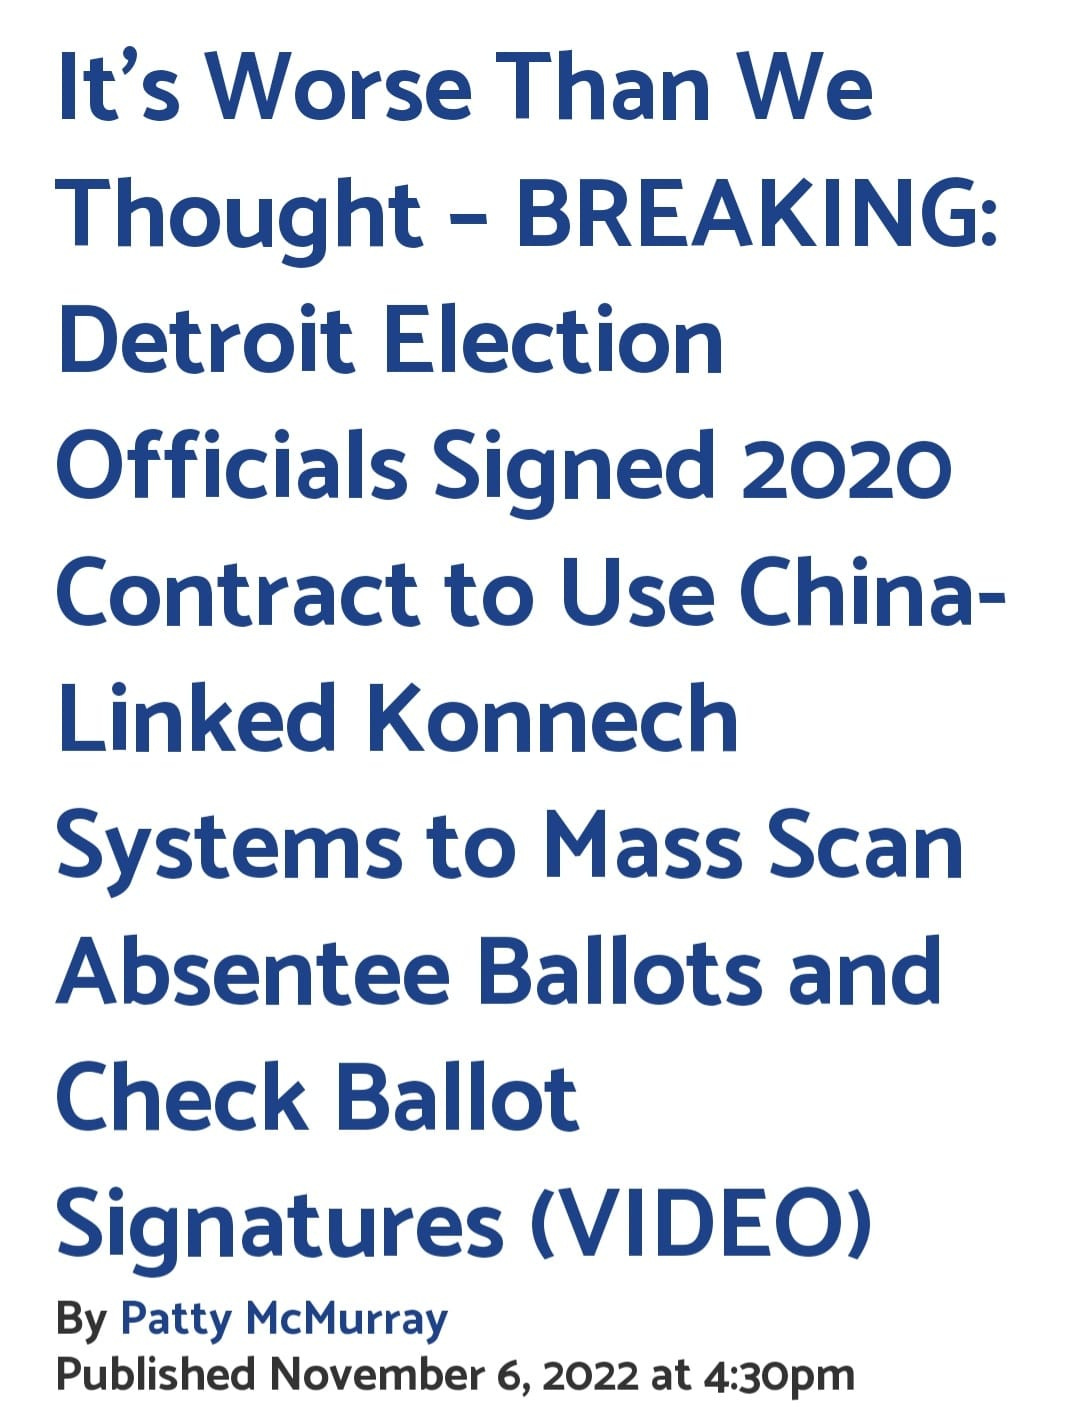 May be an image of text that says 'It's Worse Than We Thought- BREAKING: Detroit Election Officials Signed 2020 Contract to Use China- Linked Konnech Systems to Mass Scan Absentee Ballots and Check Ballot Signatures (VIDEO) By Patty McMurray Published November 6, 2022 at 4:30pm'